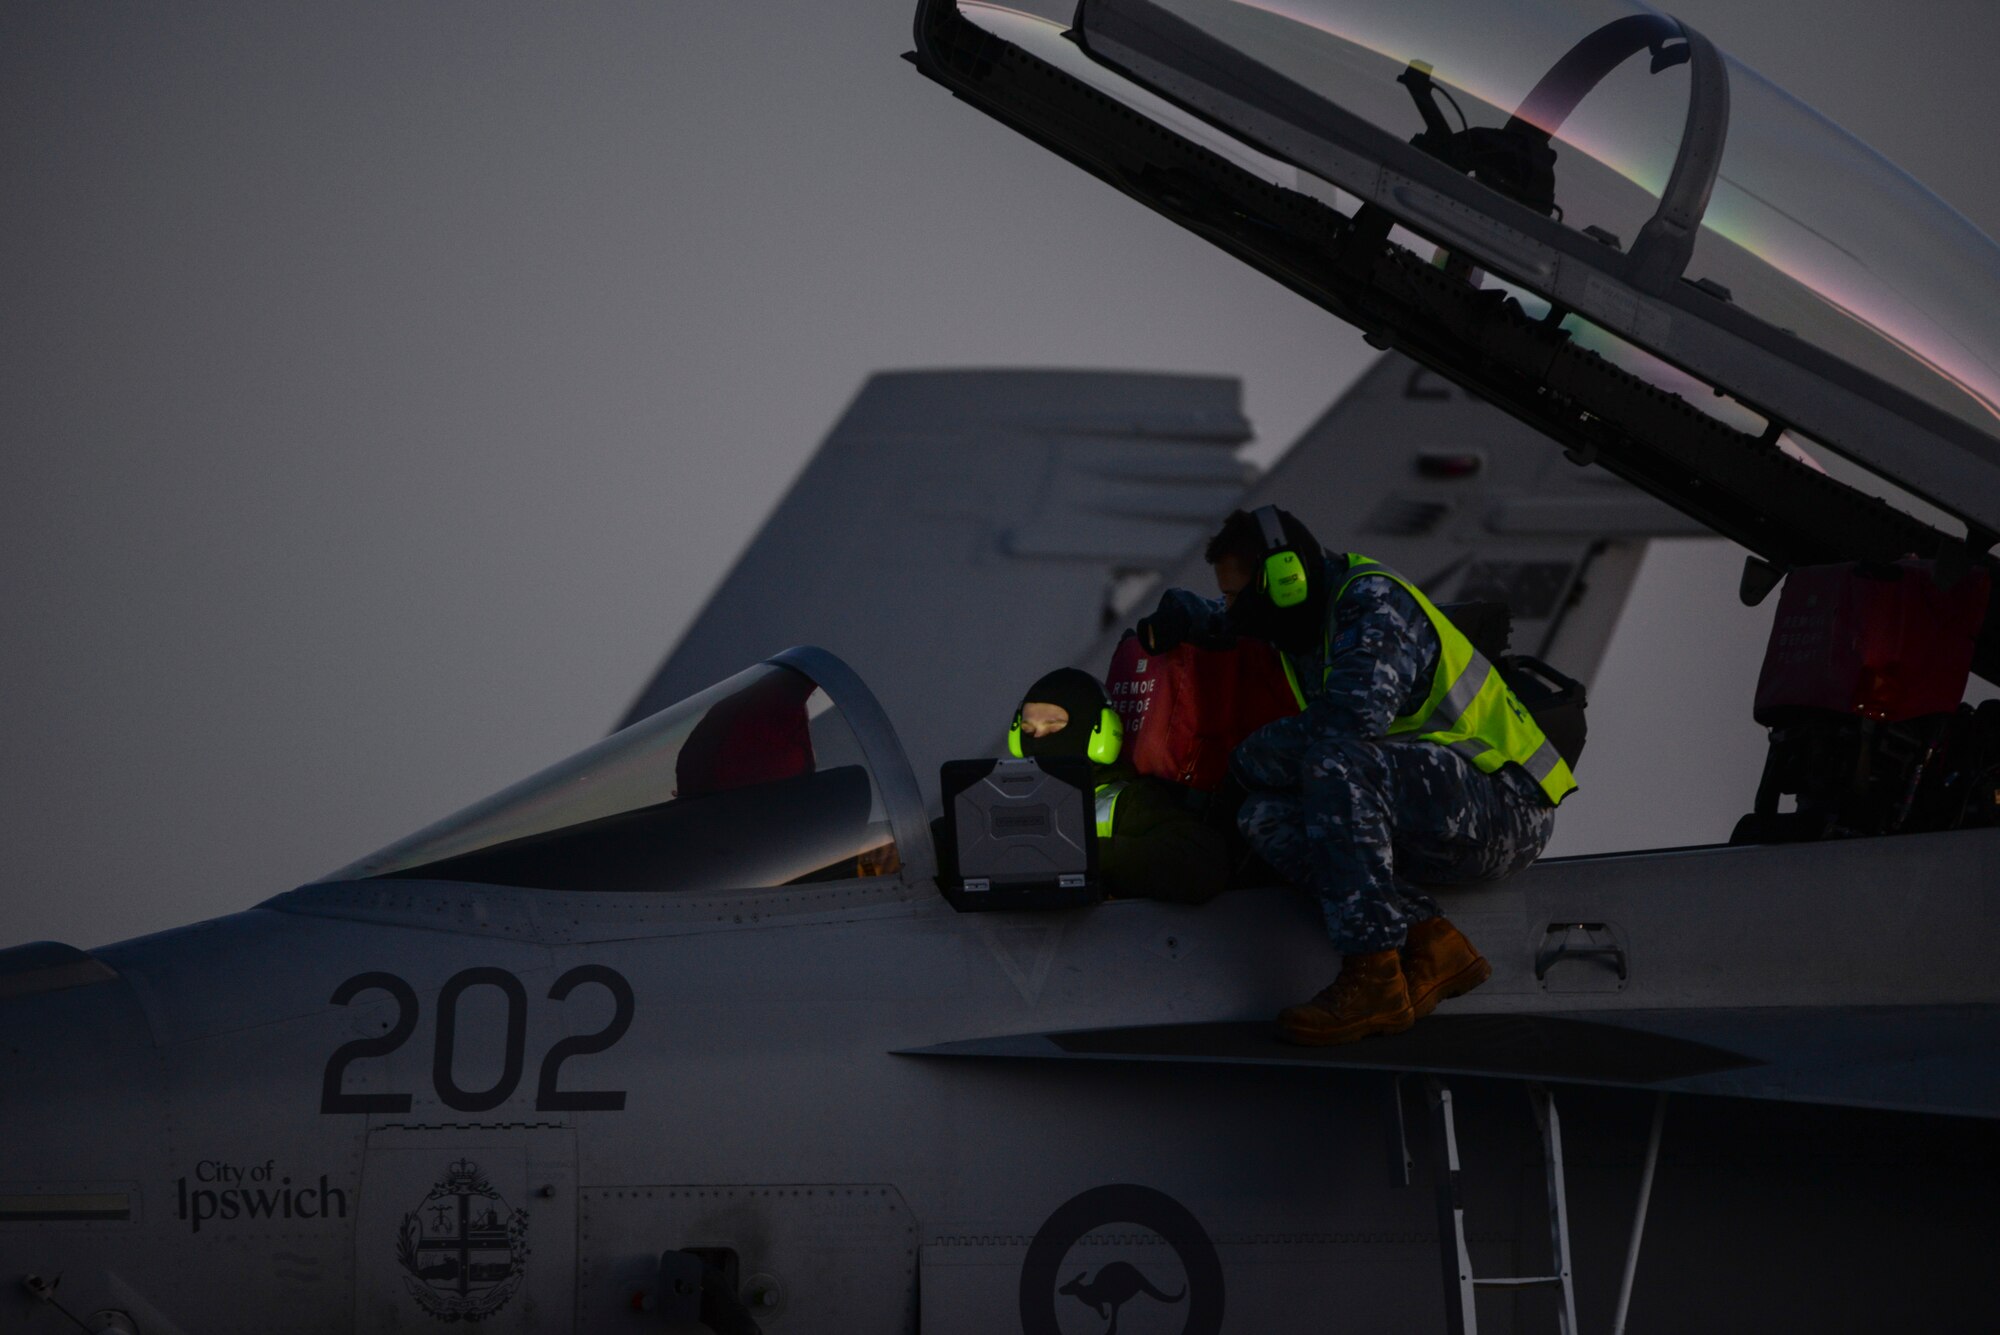 Royal Australian Air Force aircrew assigned to No. 1 Squadron, RAAF Amberley, Australia, perform maintenance checks on an F/A-18 Super Hornet during Red Flag 16-1 at Nellis Air Force Base, Nev., Feb. 2, 2016. Flying units from around the world the globe deploy to Nellis AFB to participate in Red Flag, the exercise is held four times a year and organized by the 414th Combat Training Squadron. (U.S. Air Force photo by Airman 1st Class Nathan Byrnes)